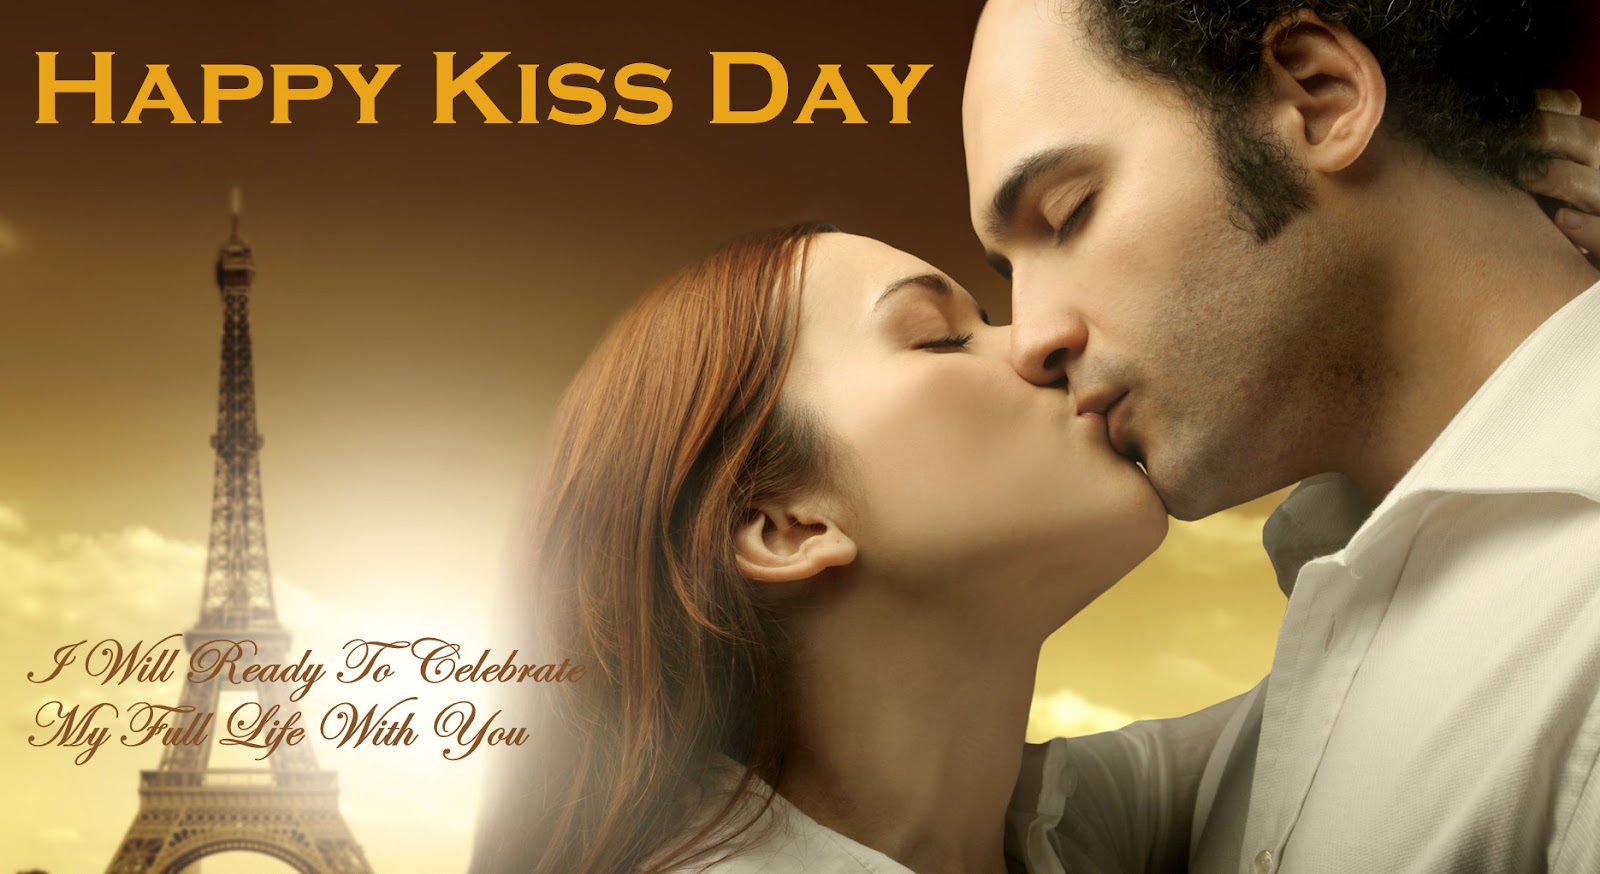 happy kiss day images free 